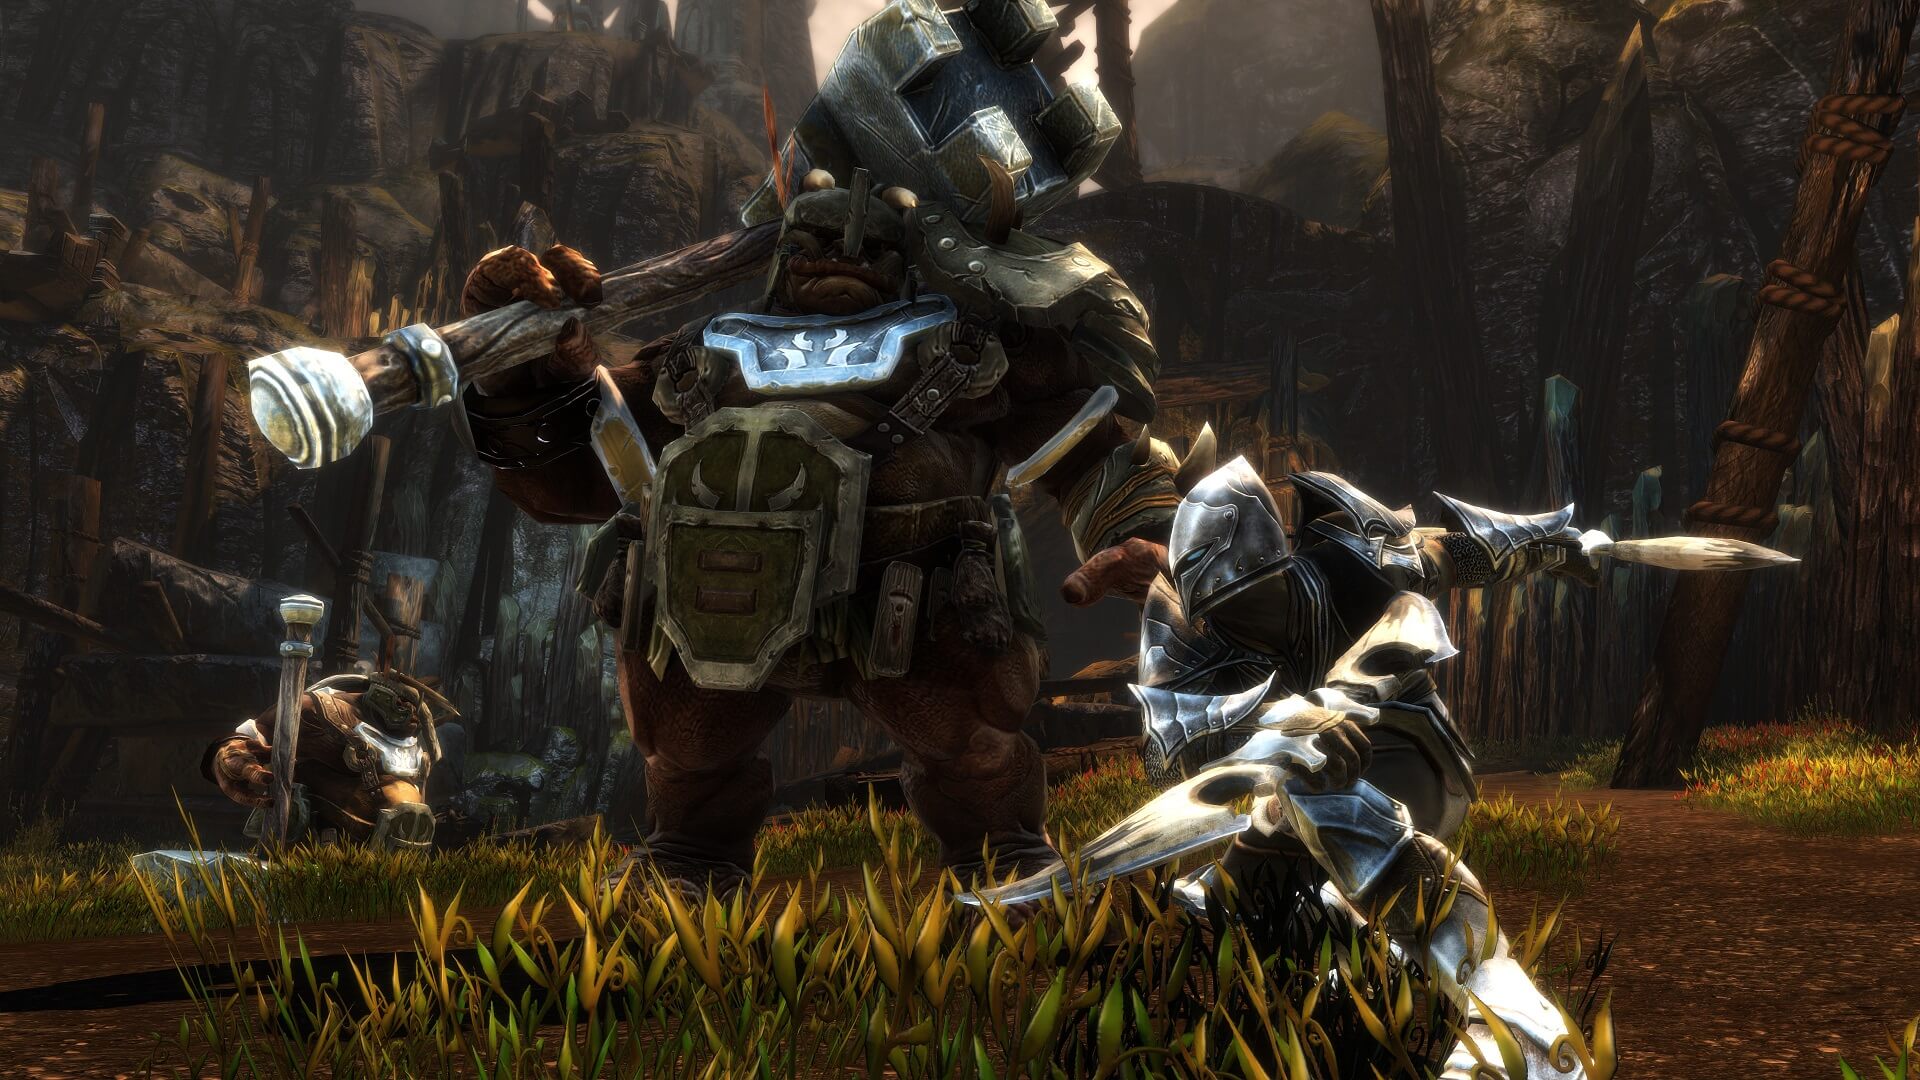 Kingdoms of Amalur: Re-Reckoning, a re-release of the 2012 RPG